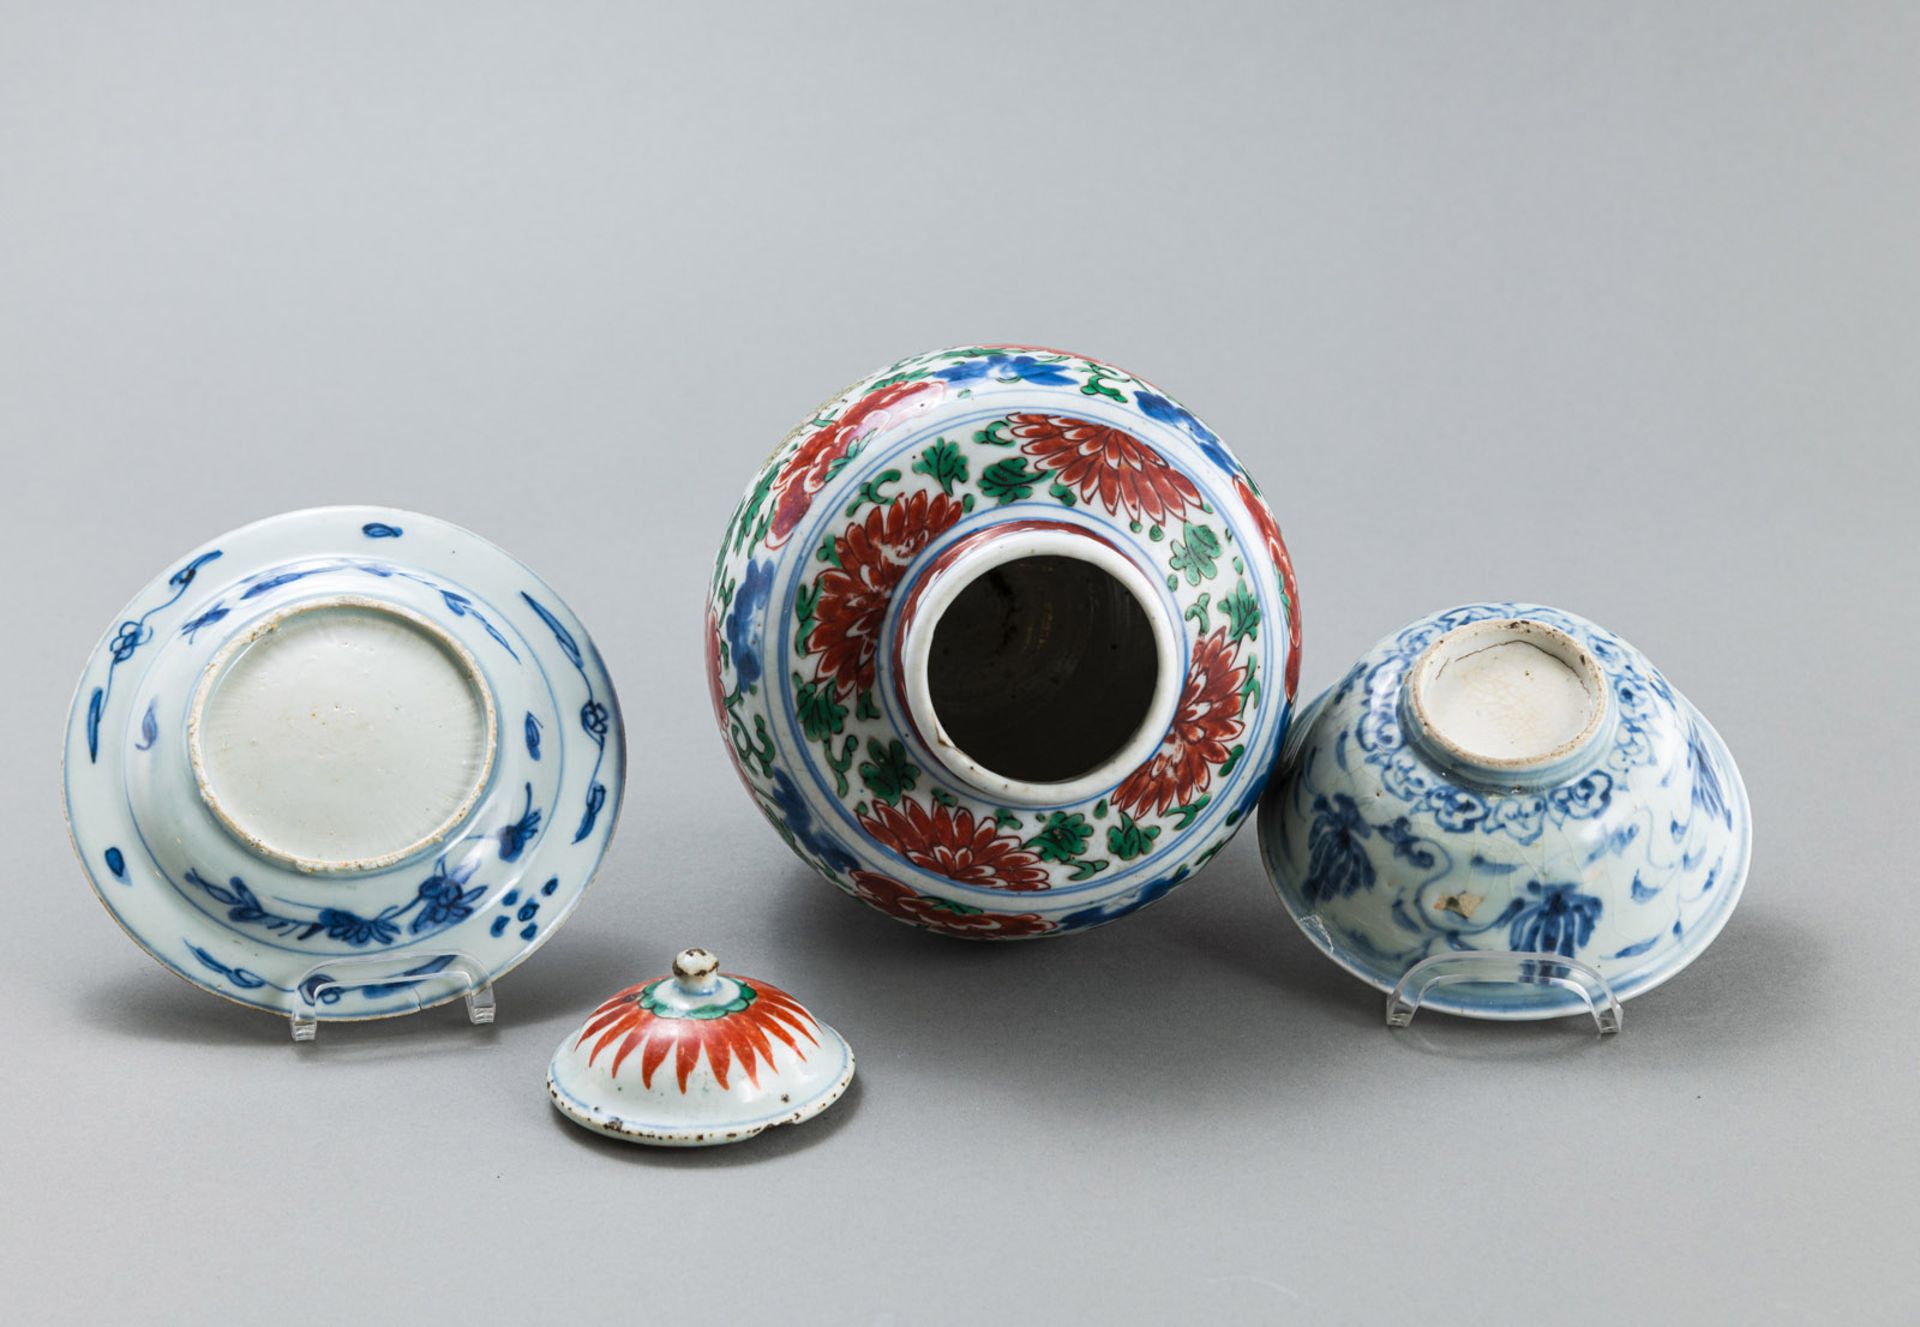 AN 'WUCAI' BUTTERFLY VASE AND COVER WITH A BLUE AND WHITE BOWL AND SAUCER - Image 3 of 4